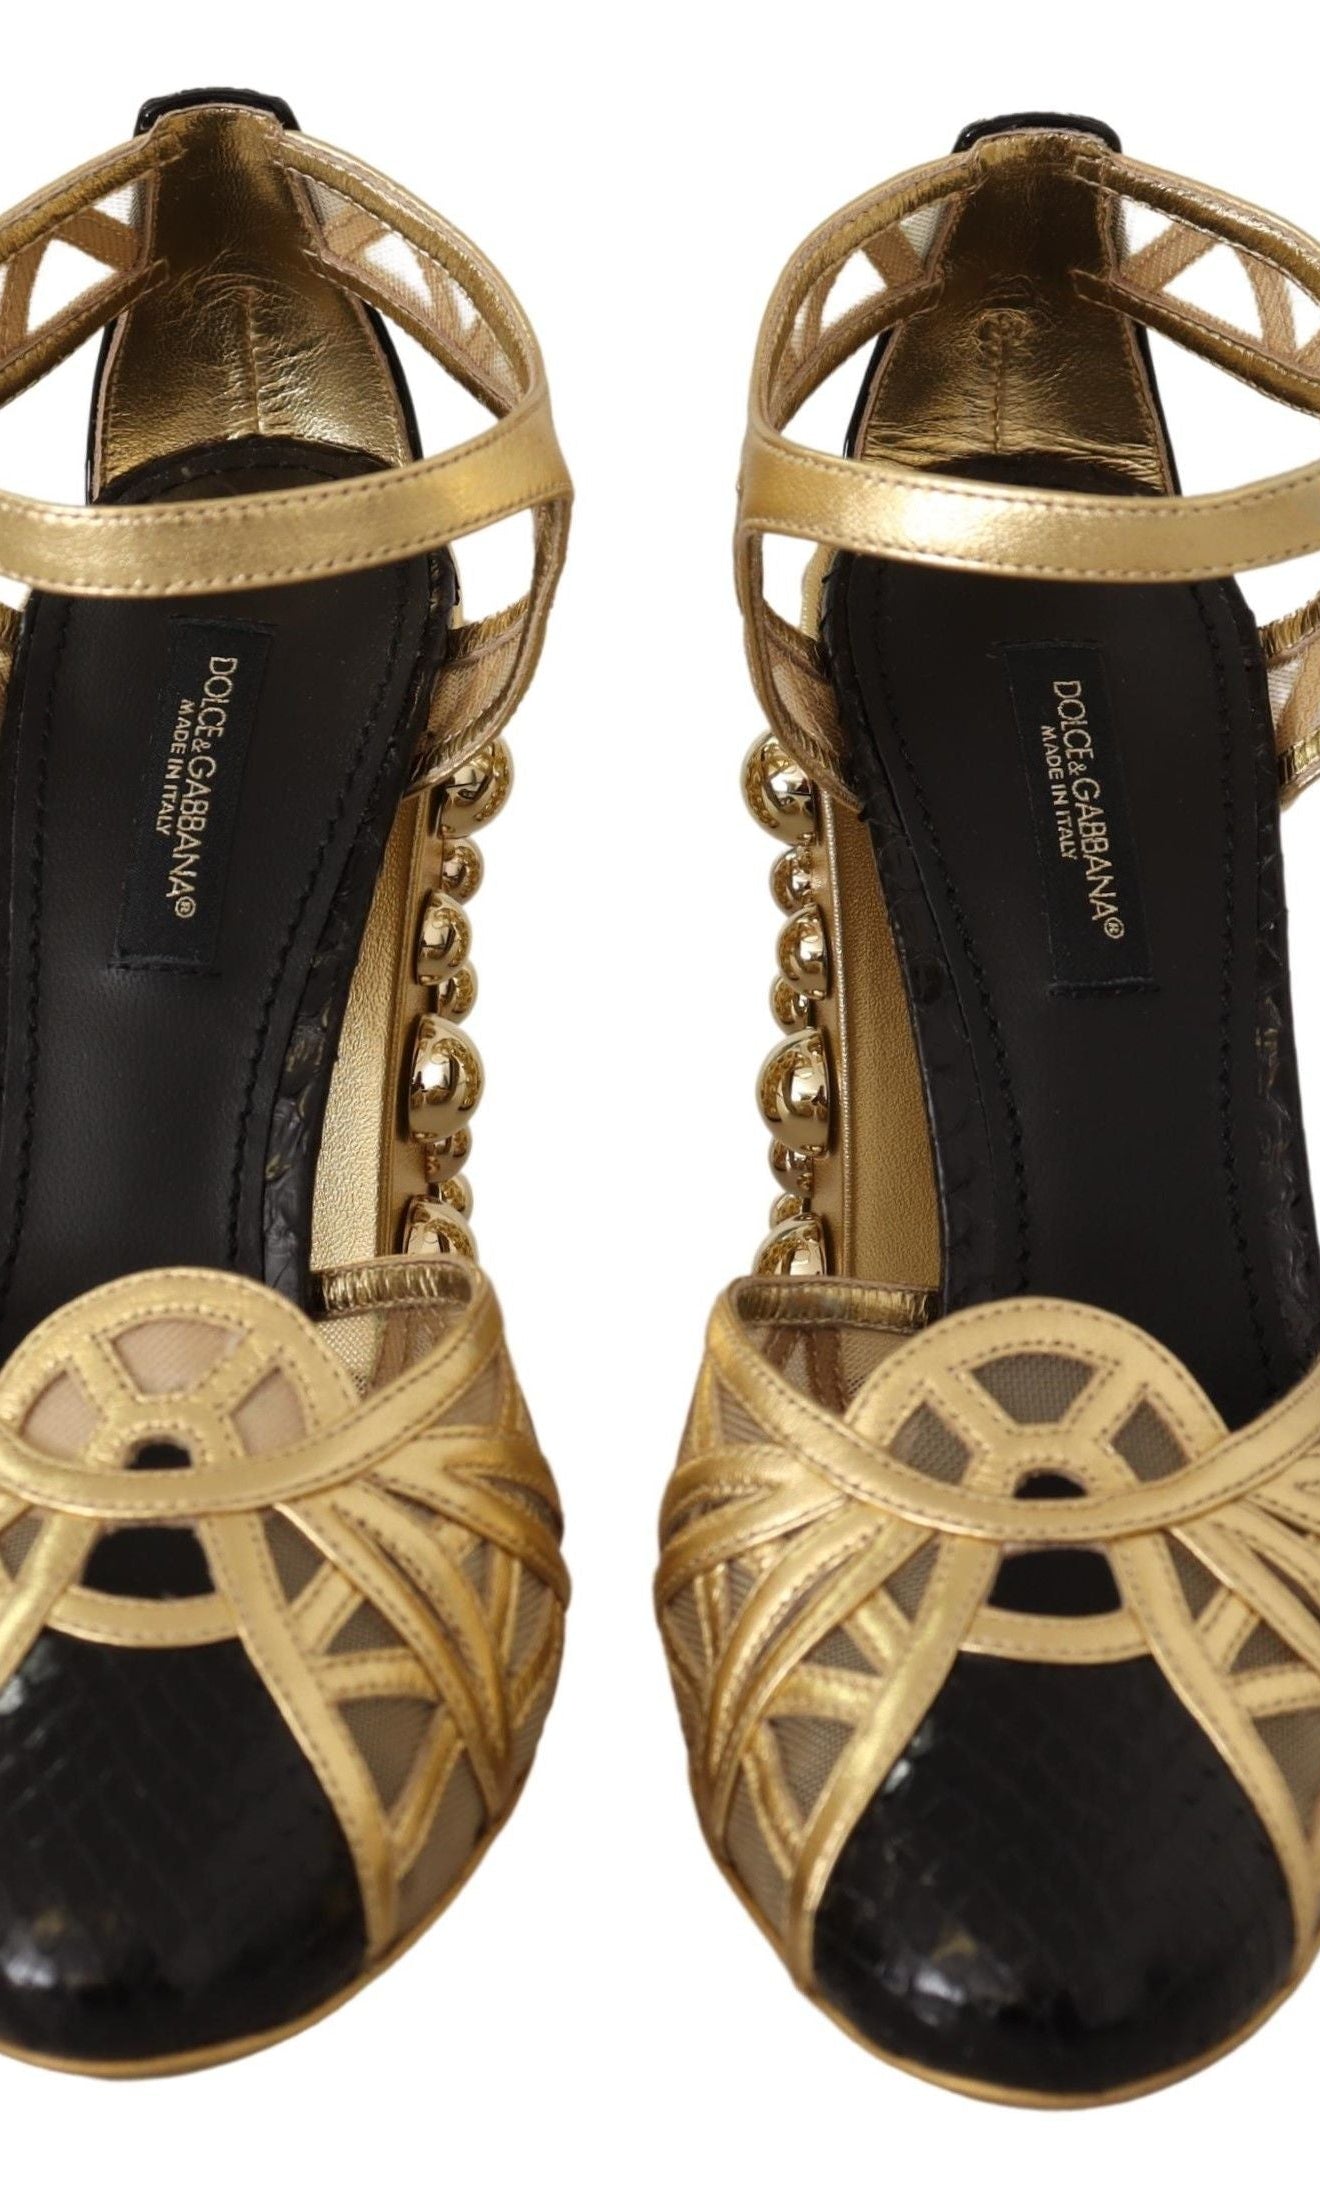 Dolce & Gabbana Black Gold Leather Studded Ankle Straps Shoes GENUINE AUTHENTIC BRAND LLC